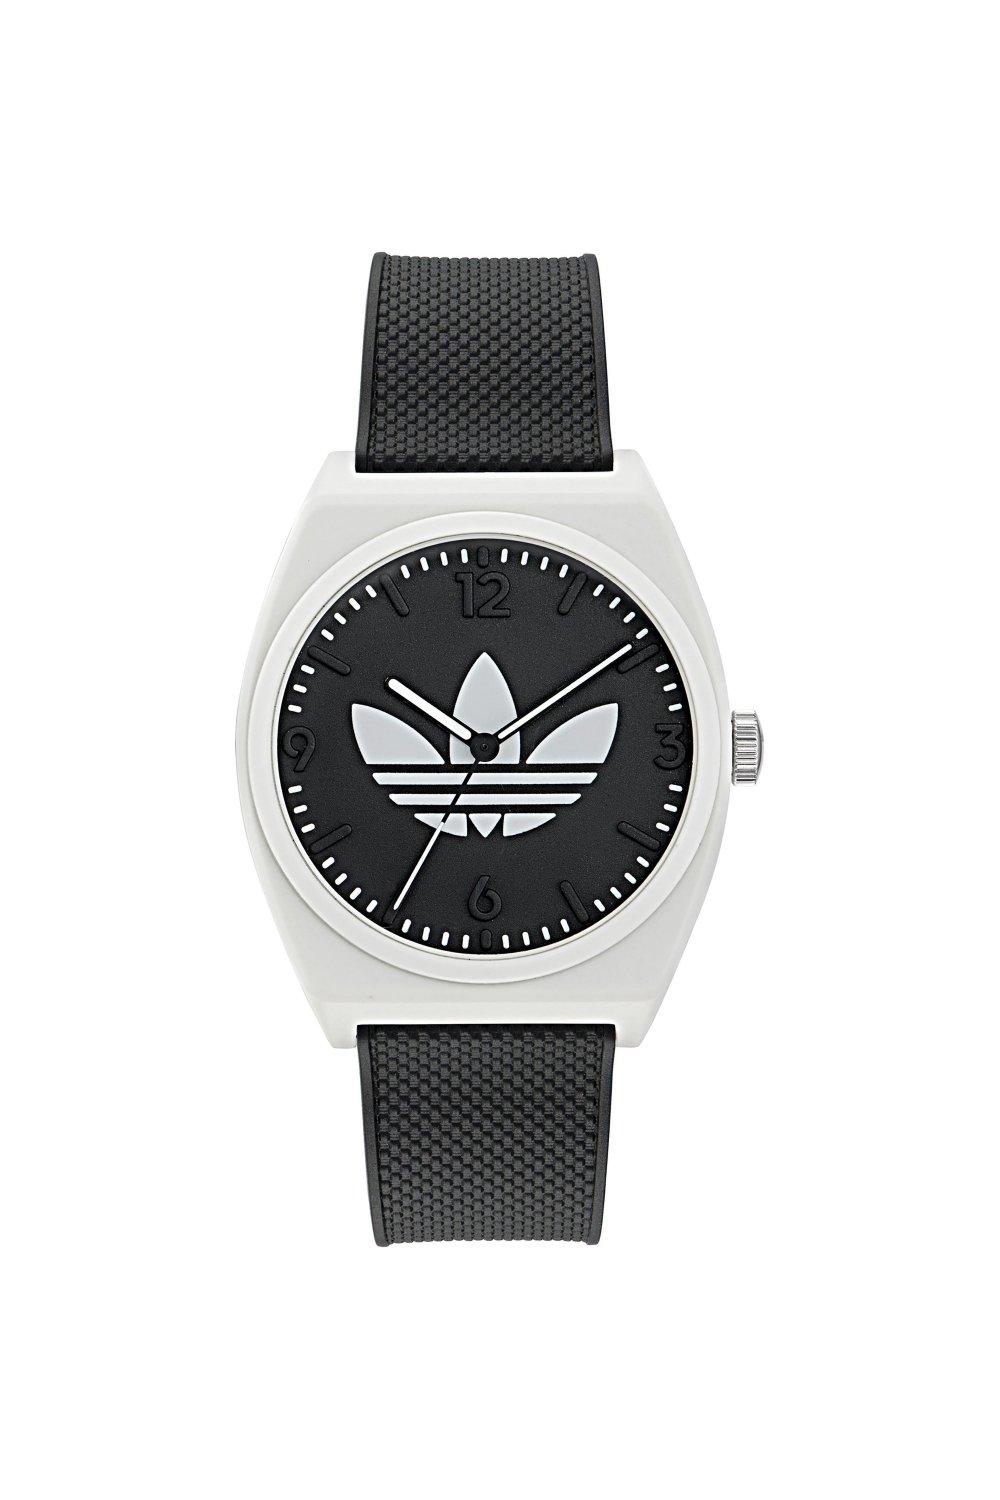 | Analogue Two adidas Watch Project - Aost23550 Quartz Originals Fashion Plastic/resin Watches |